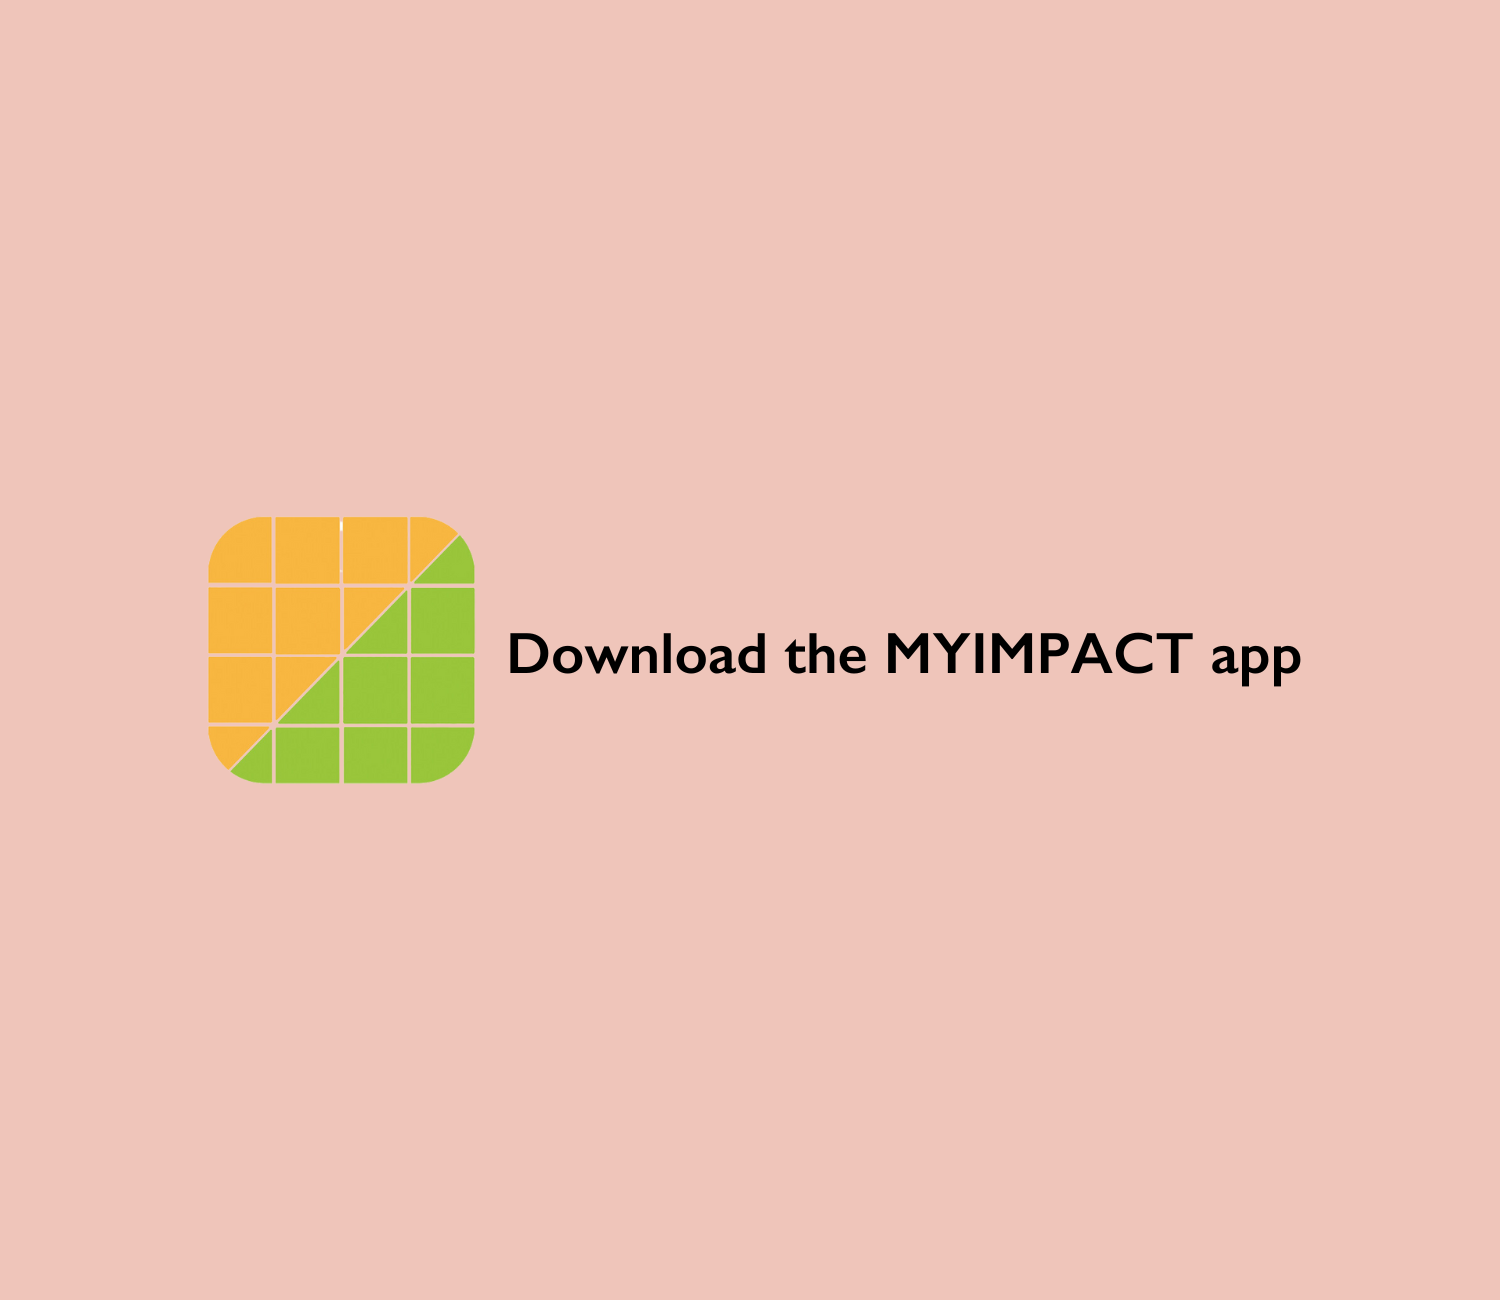 my impact app download icon for volunteers